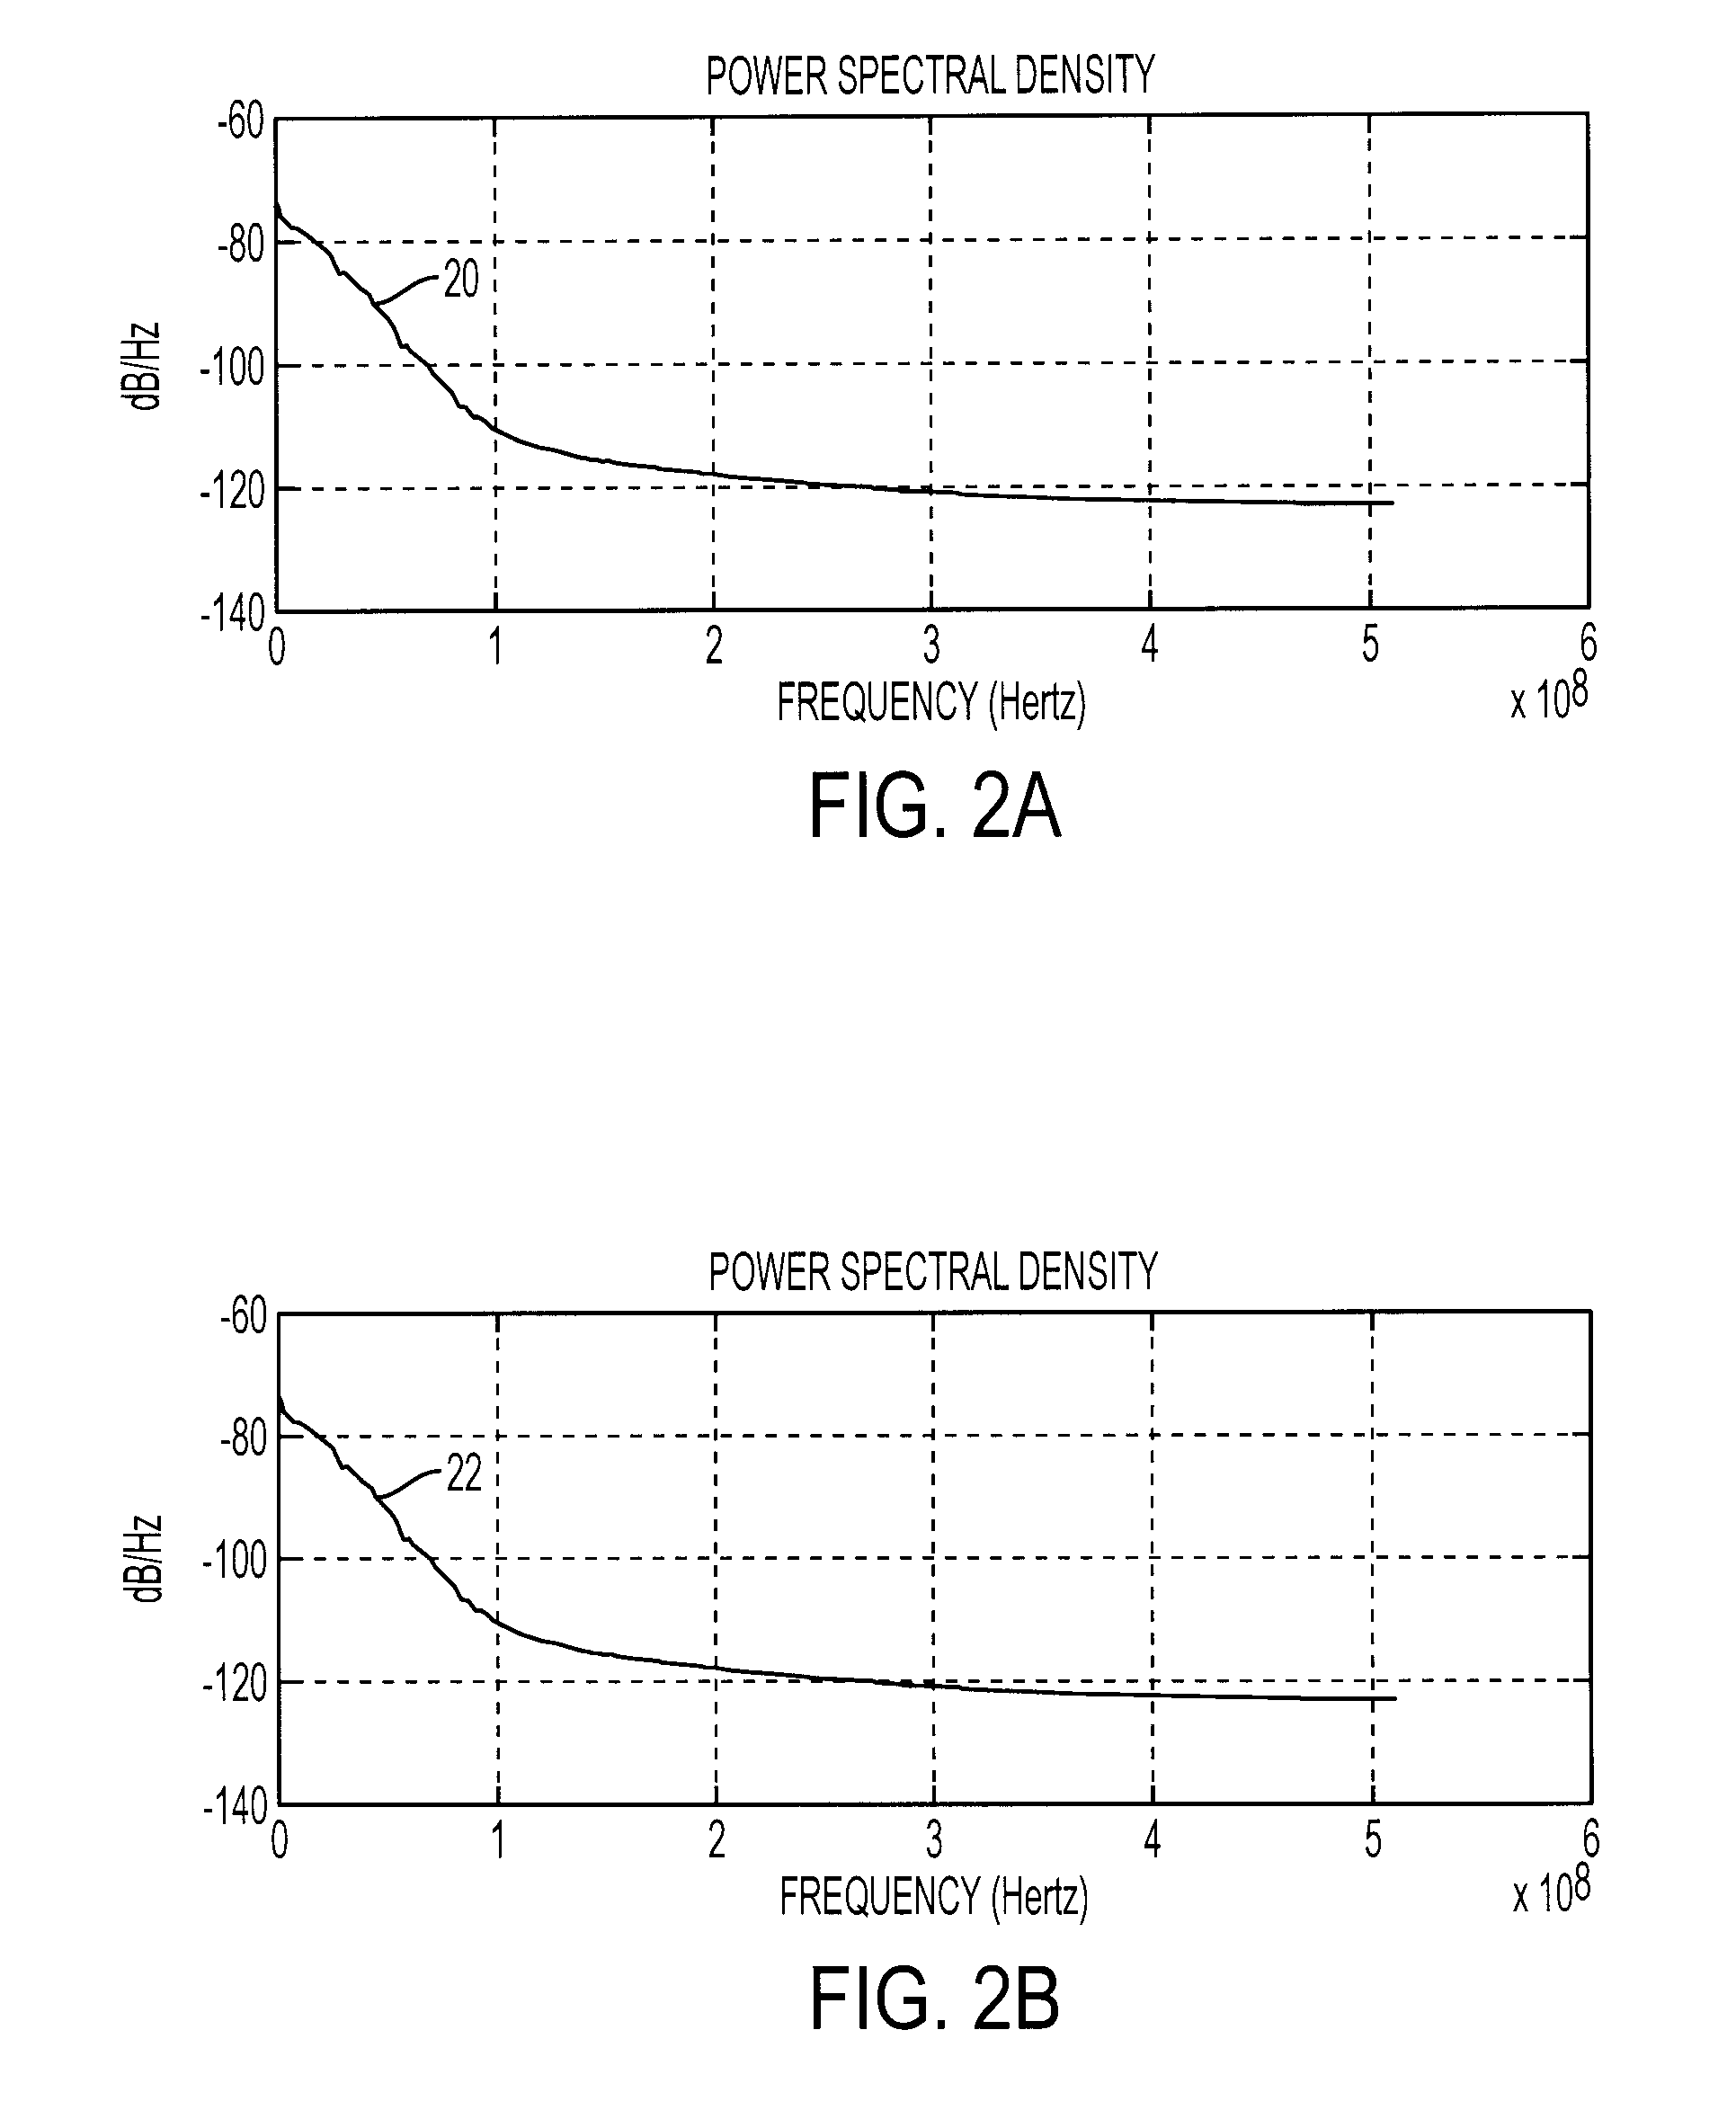 Method and apparatus for secure digital communications using chaotic signals